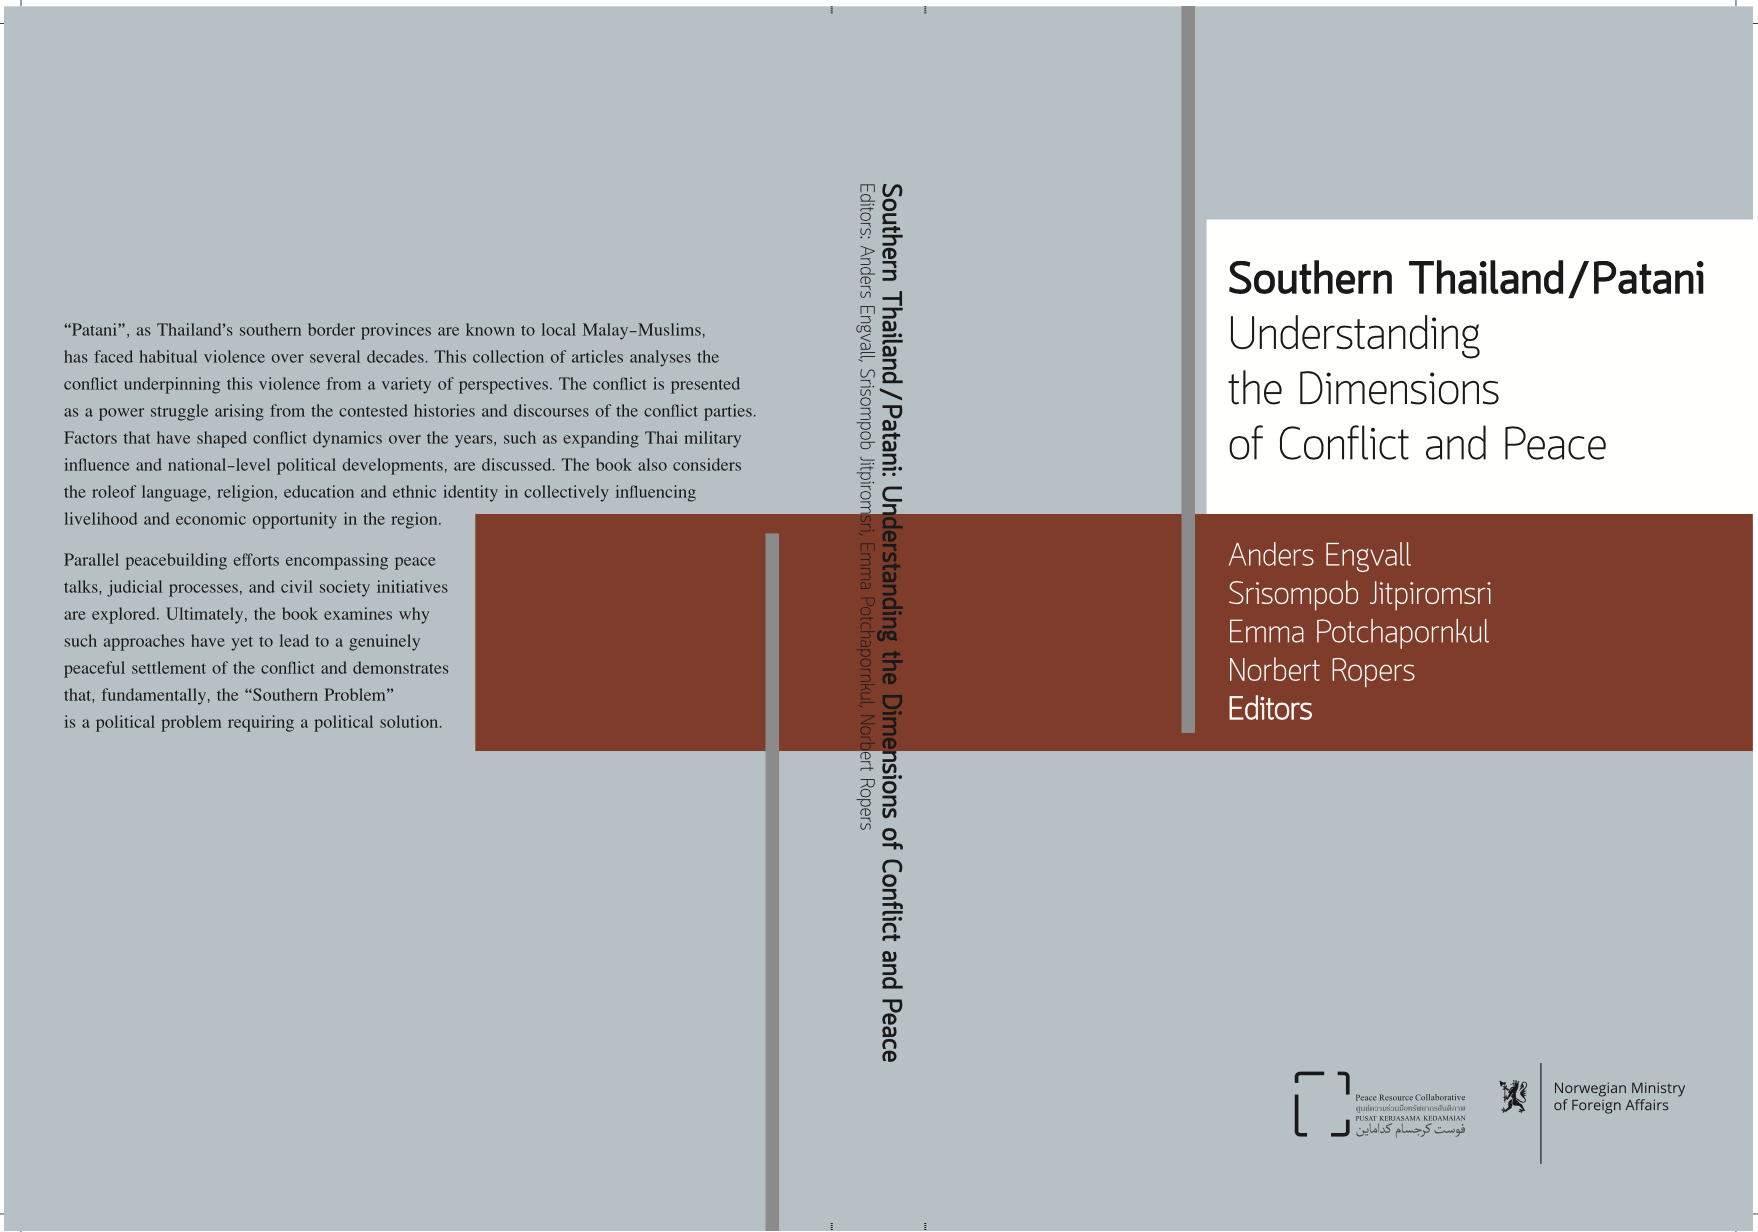 Southern Thailand/Patani: Understanding the Dimensions of Conflict and Peace